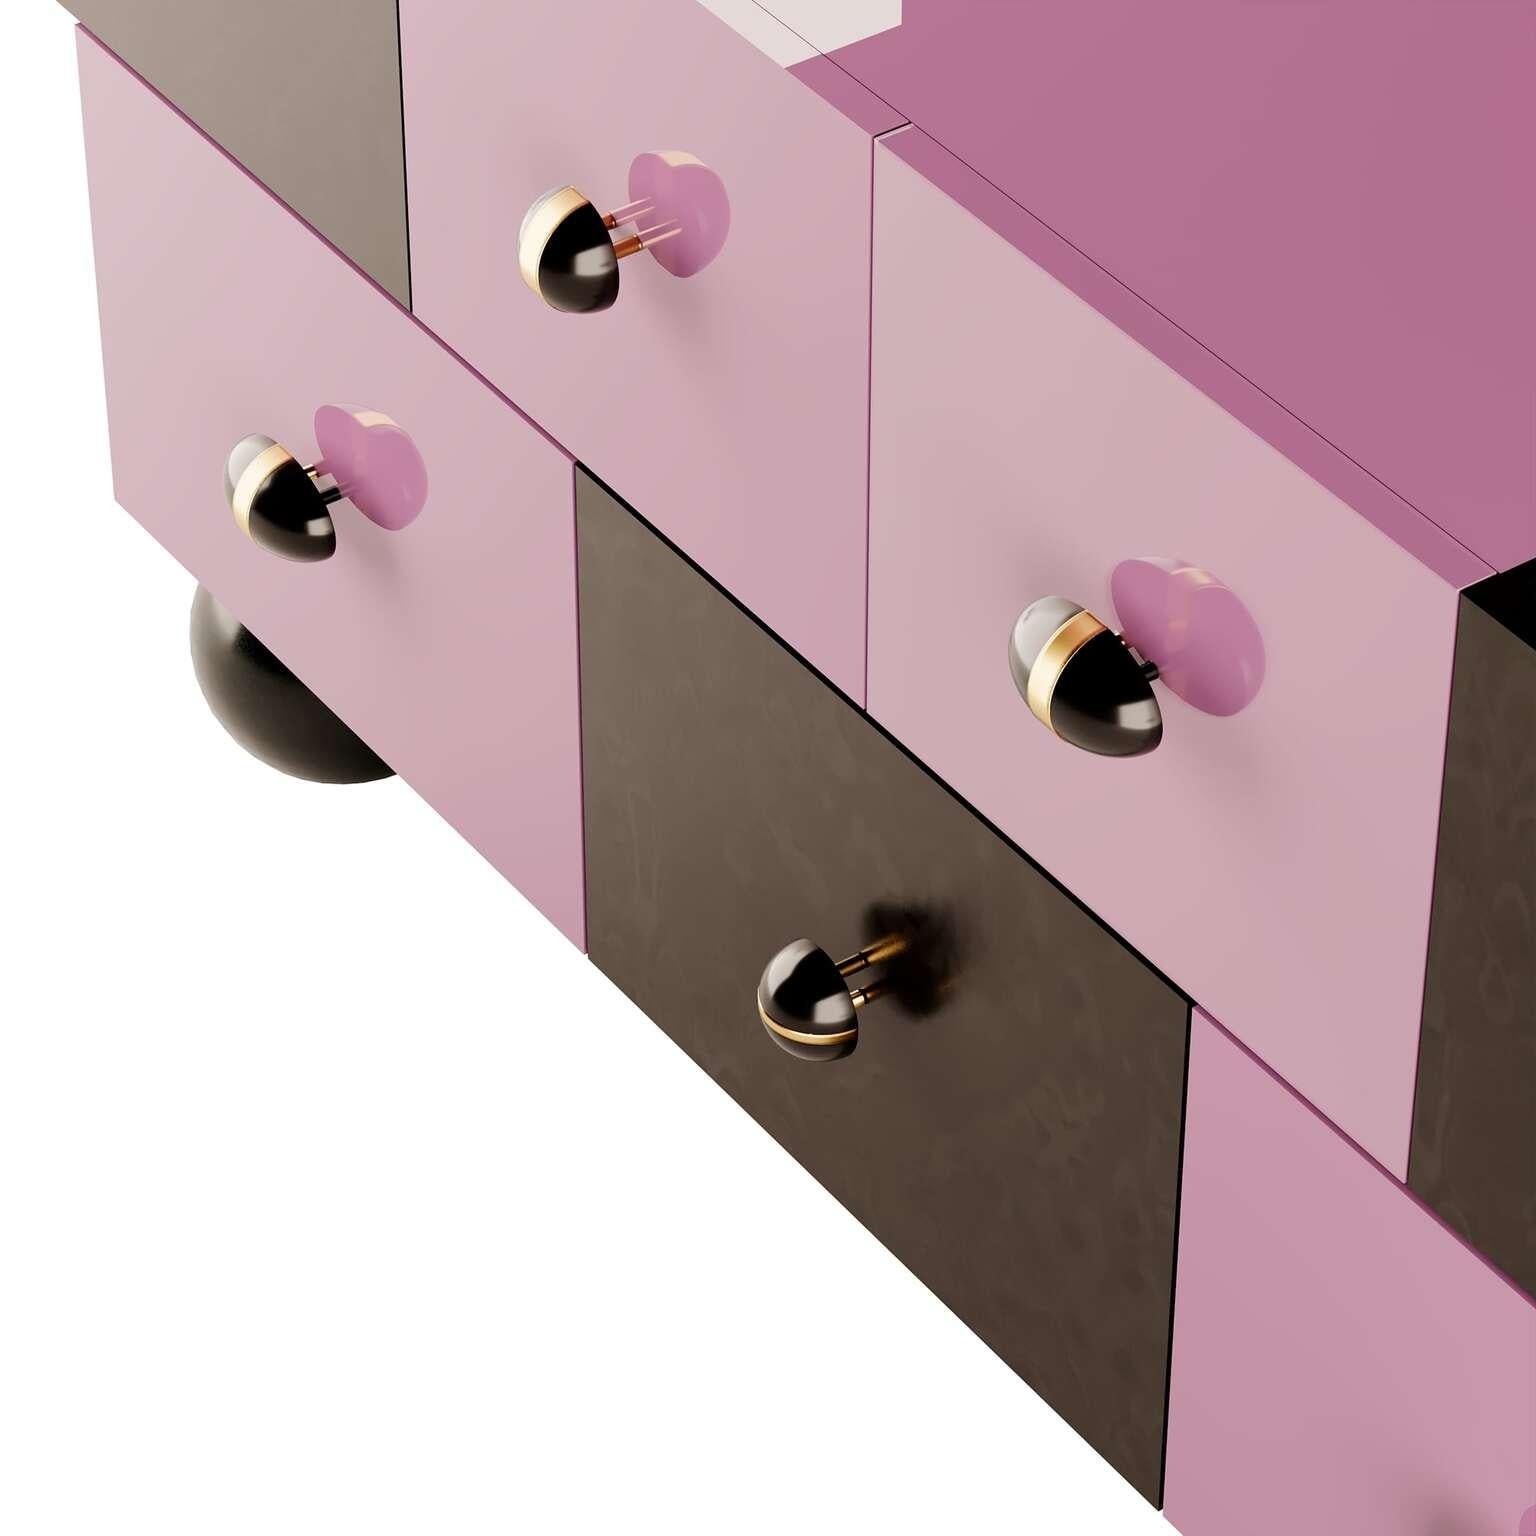 Modern Memphis Design Style Sideboard Lacquered in Lilac and Black Matt 
The Matrioska Chest of Drawers Green is a visual wonder — from its exquisite craftsmanship to its bold impact. The Matrioska chest presents a rich combination of lilac and